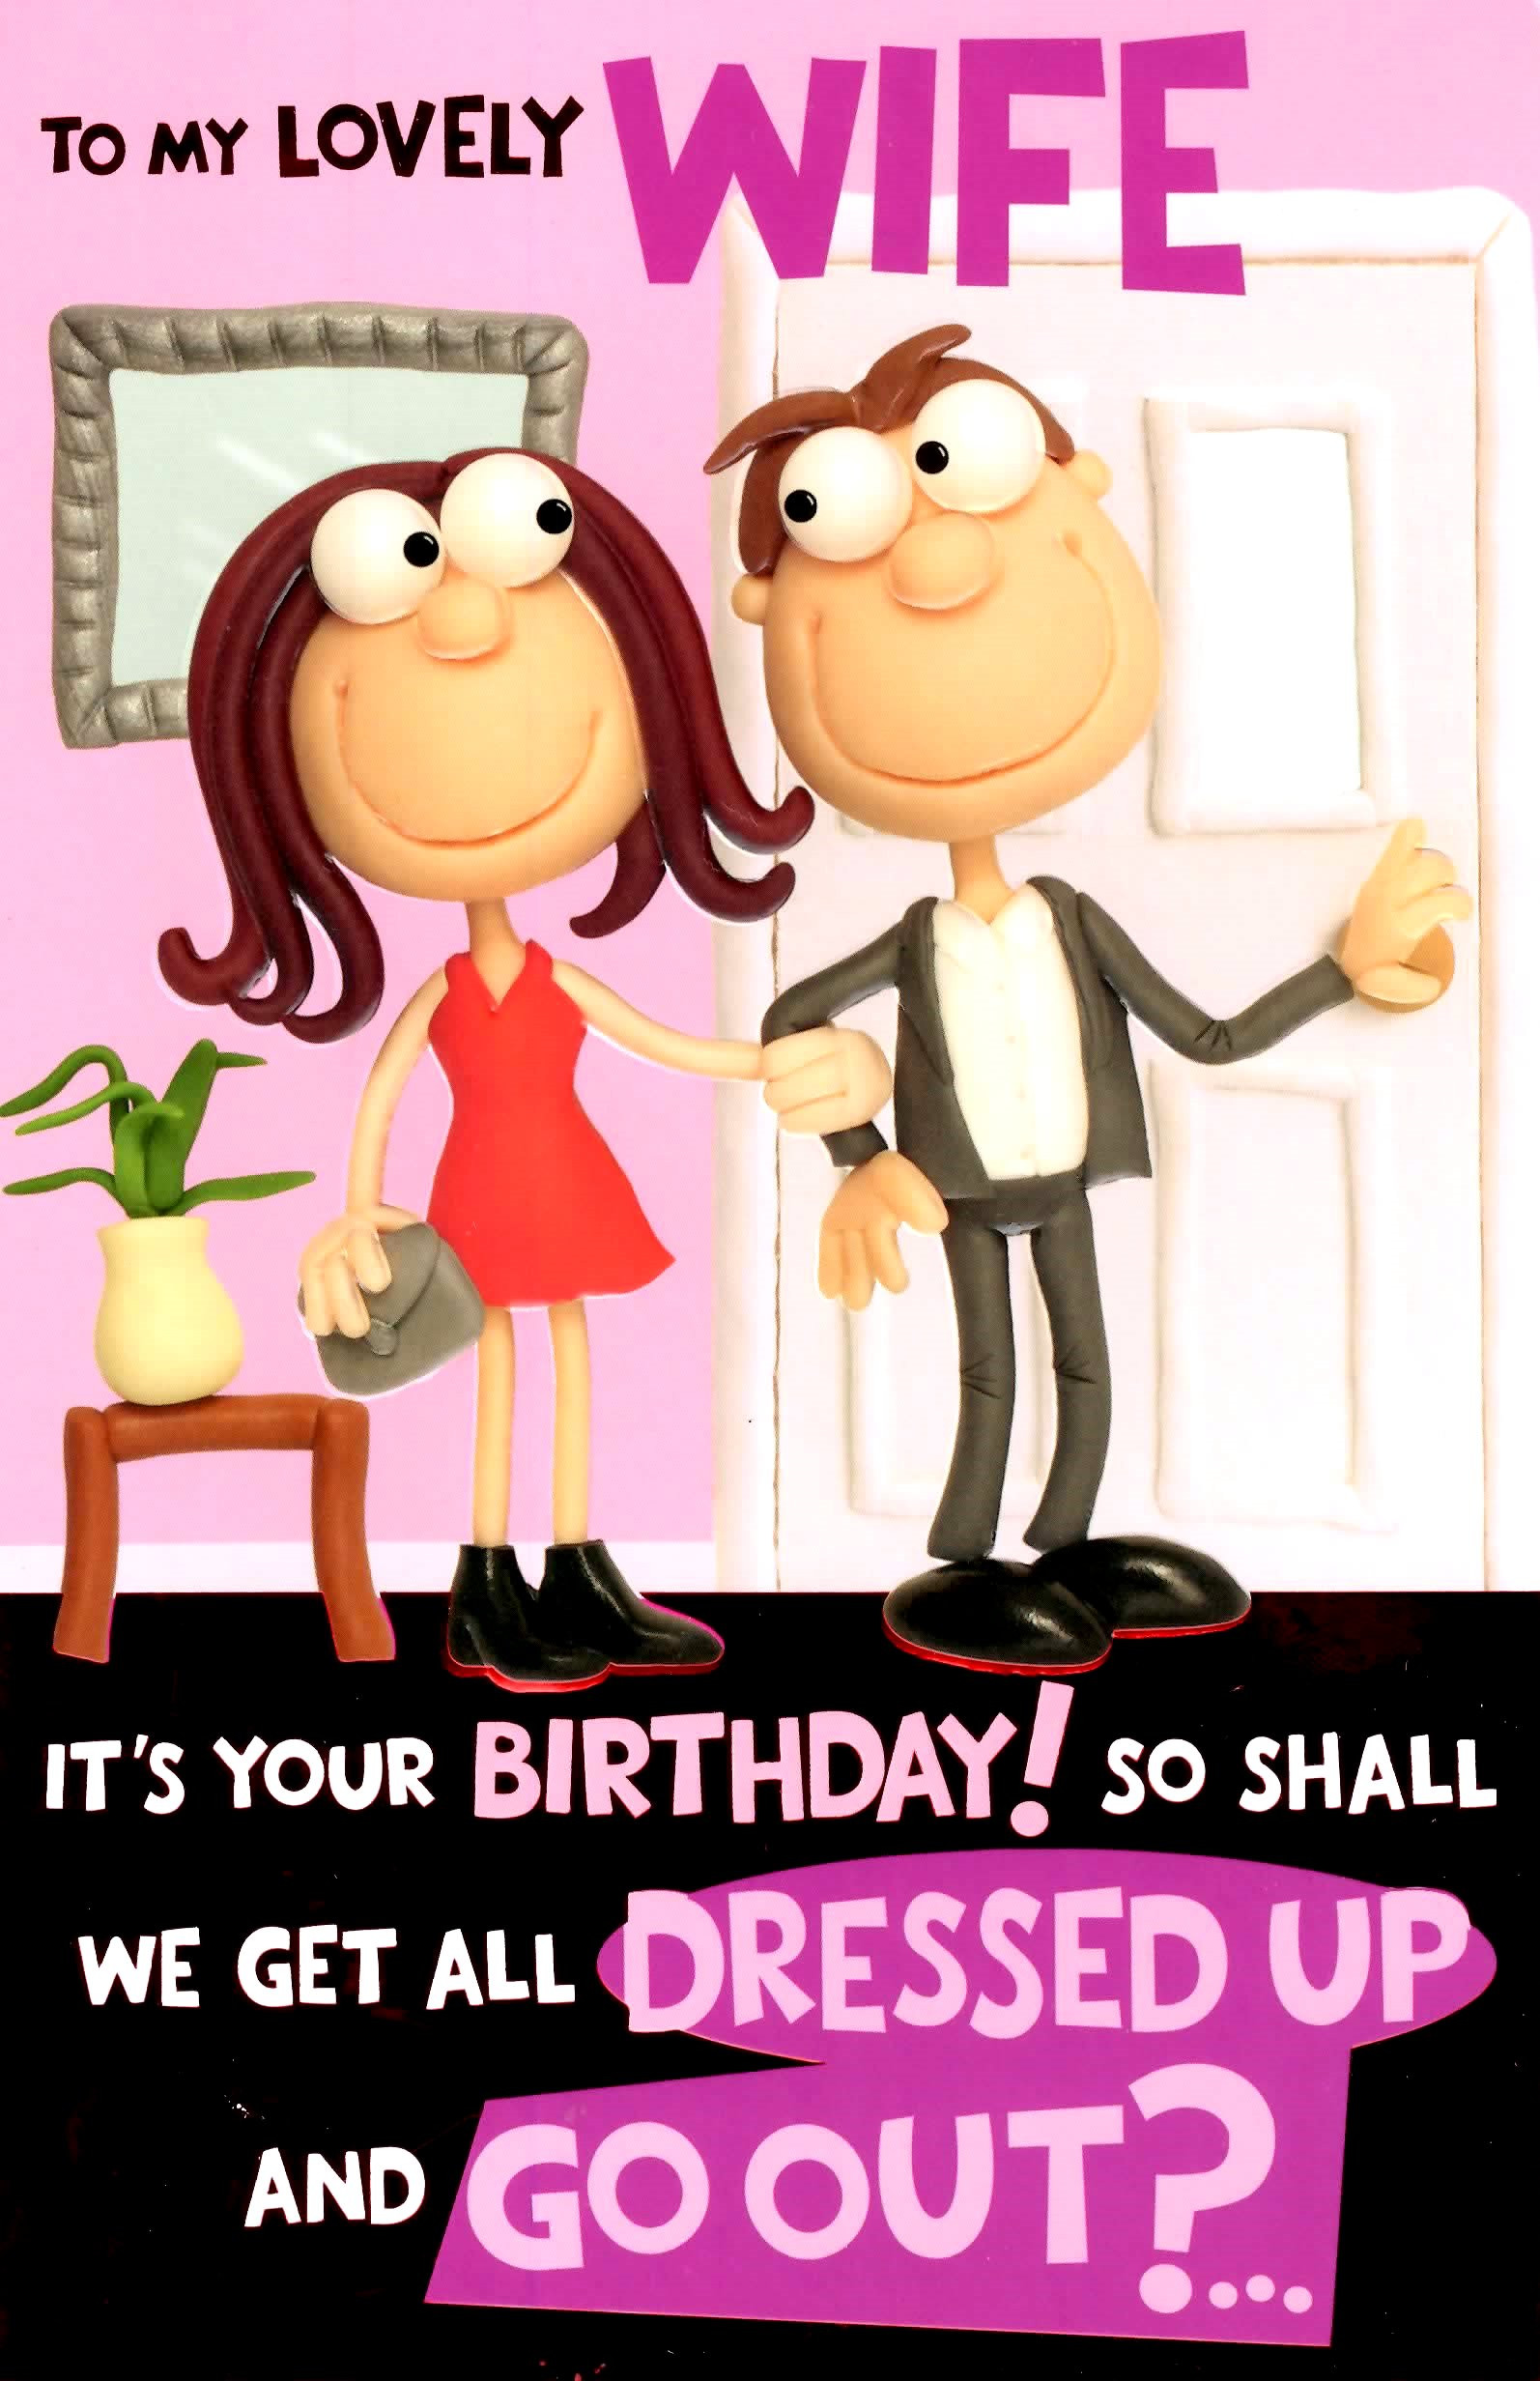 Funny Birthday Quotes For Wife
 Cute Funny Rude Lovely Wife Birthday Greeting Card